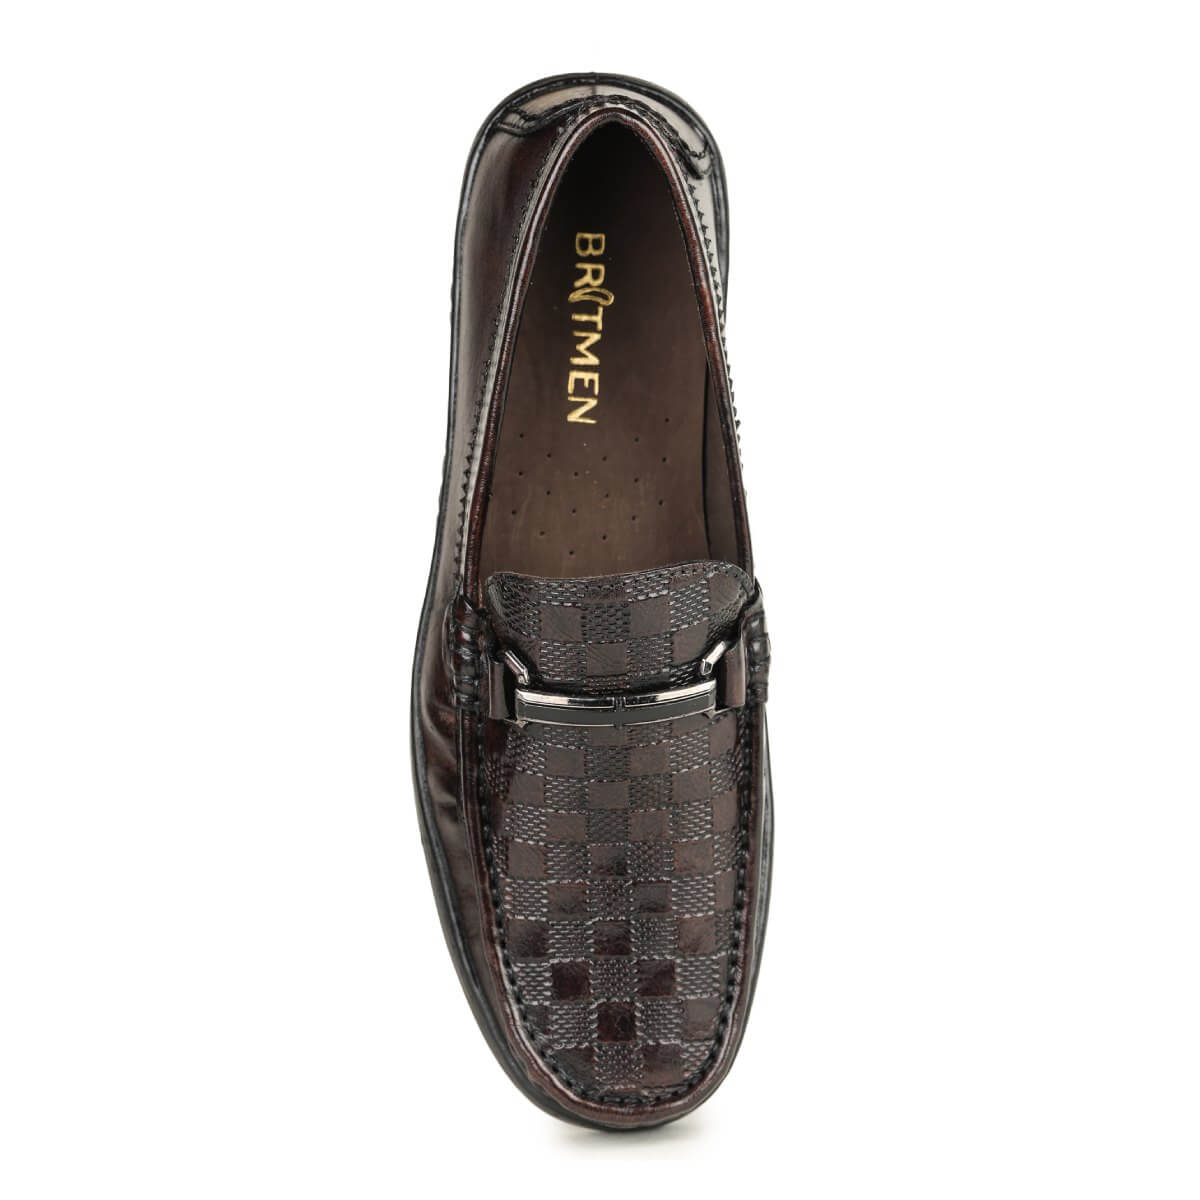 checkbox pattern loafers brown_8